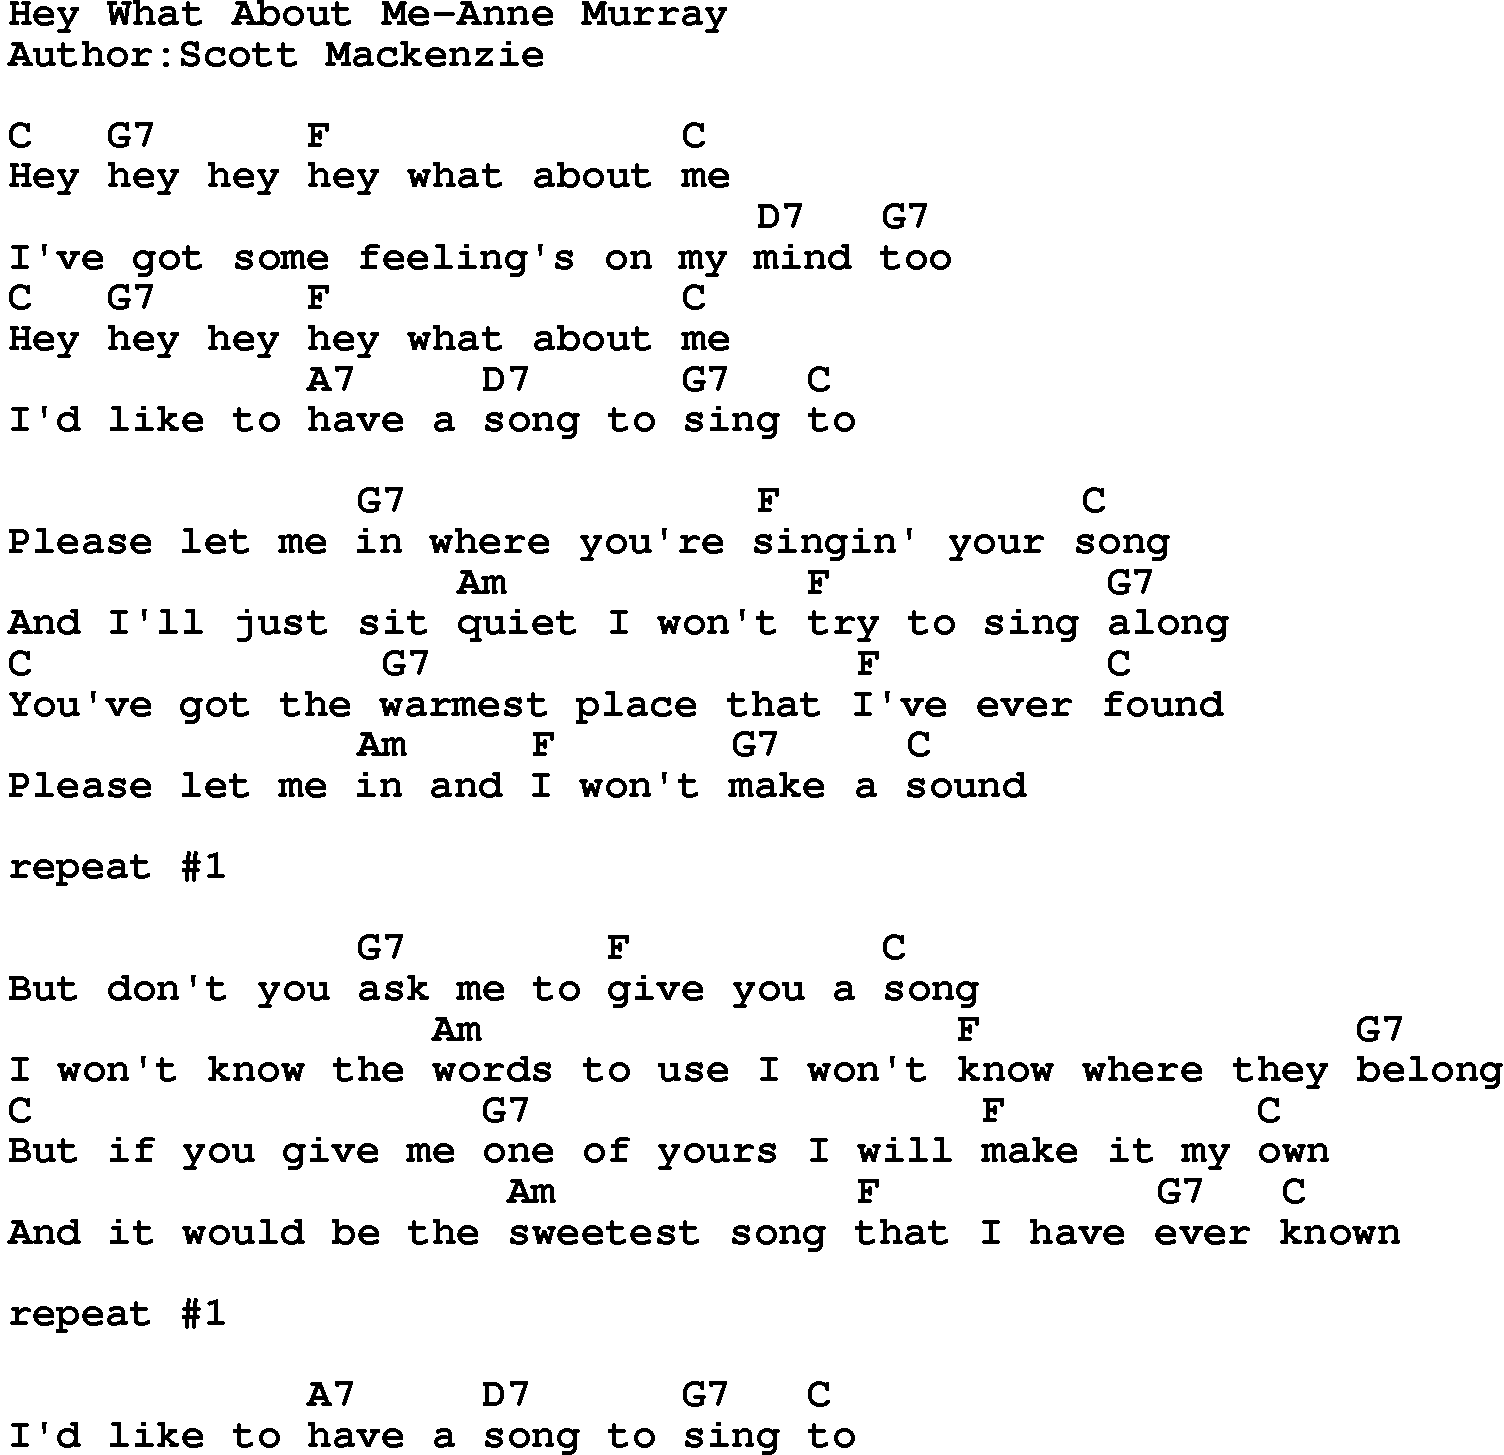 Country music song: Hey What About Me-Anne Murray lyrics and chords